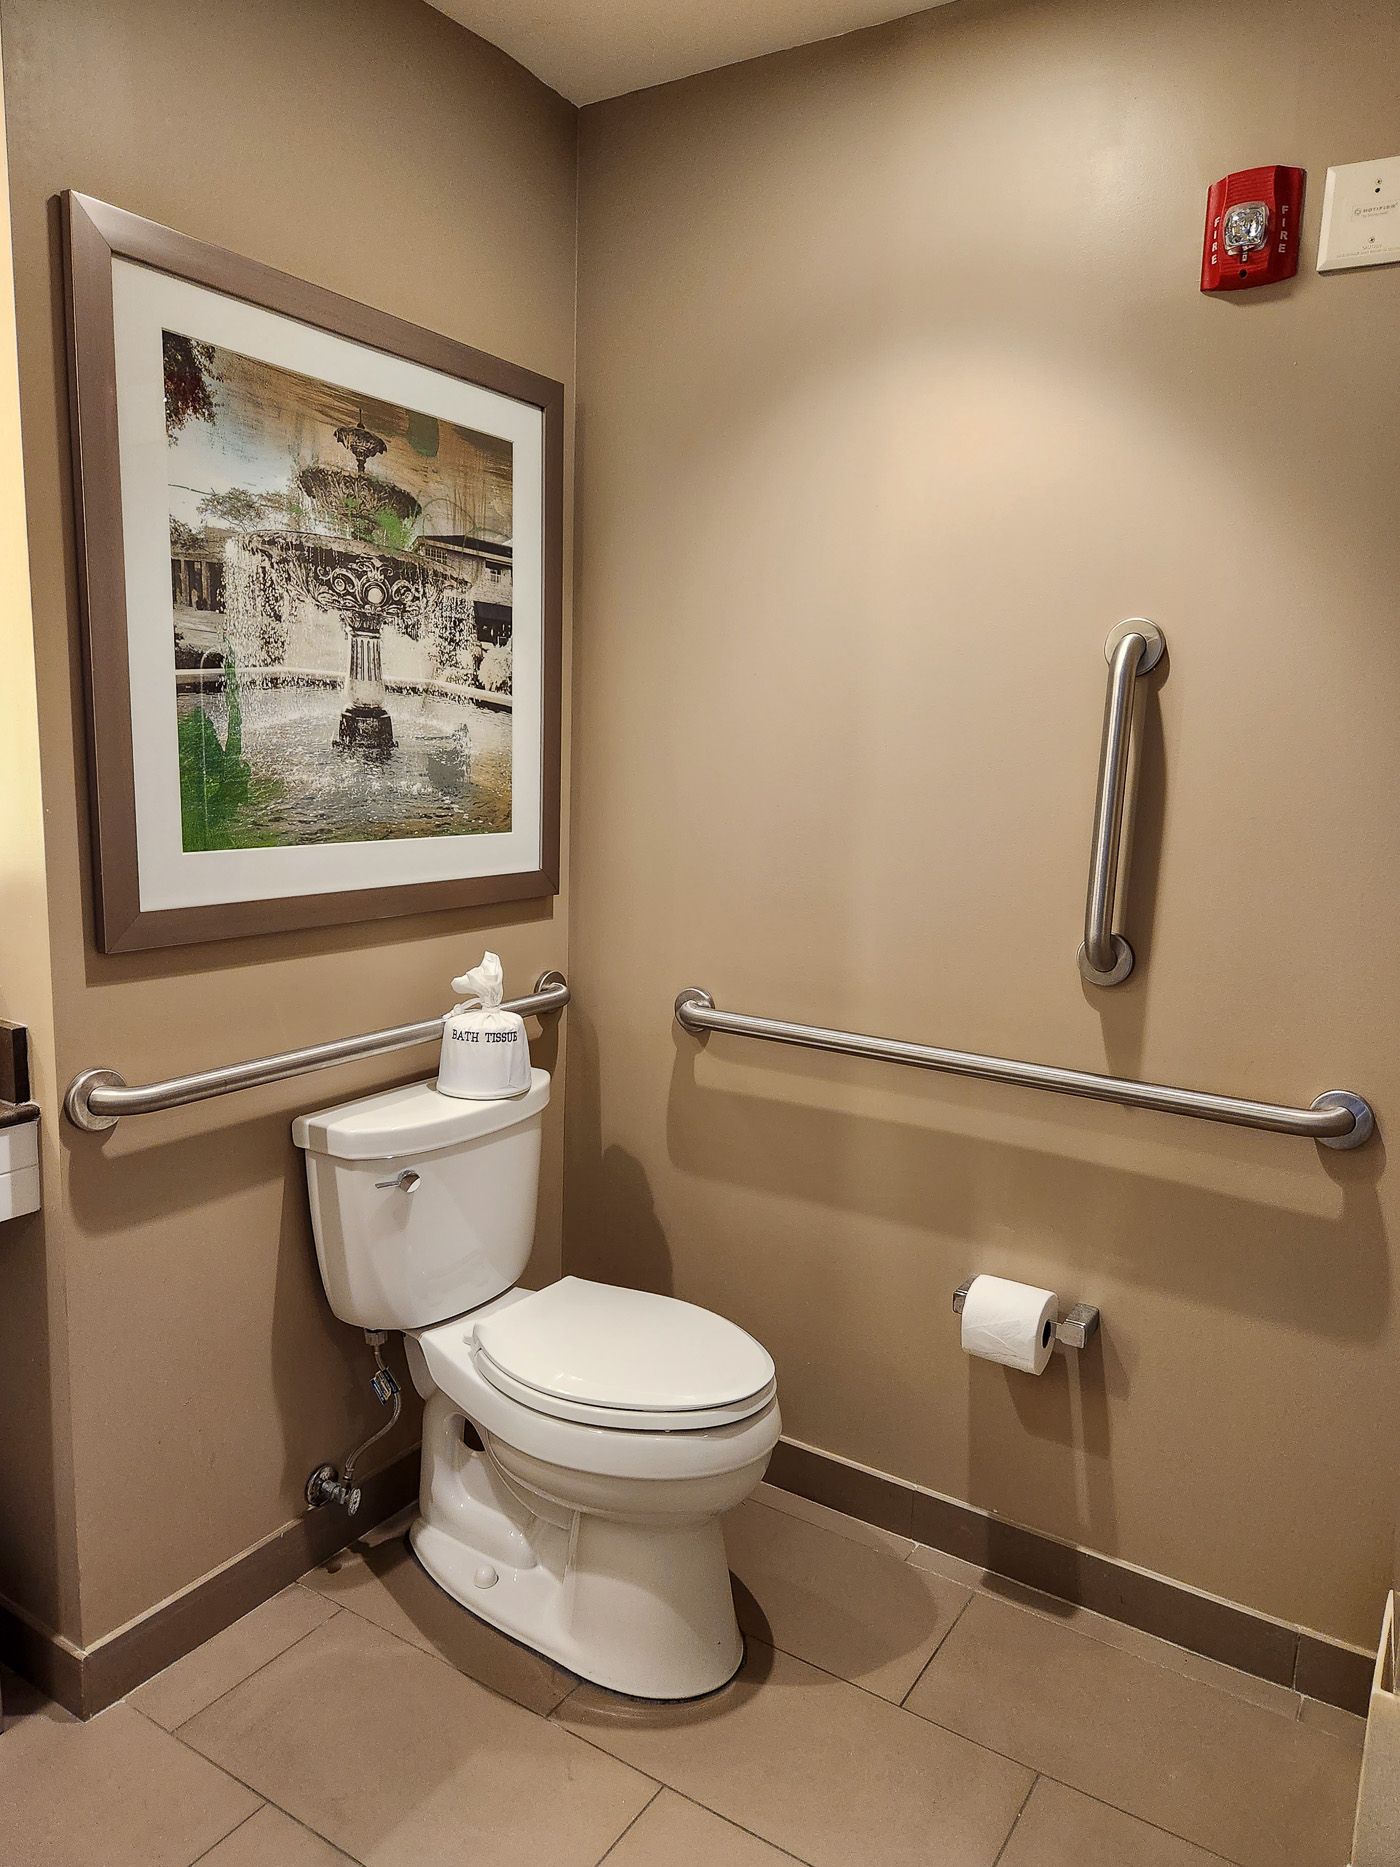 Epicurean Hotel, Autograph Collection with accessible toilet grab bars